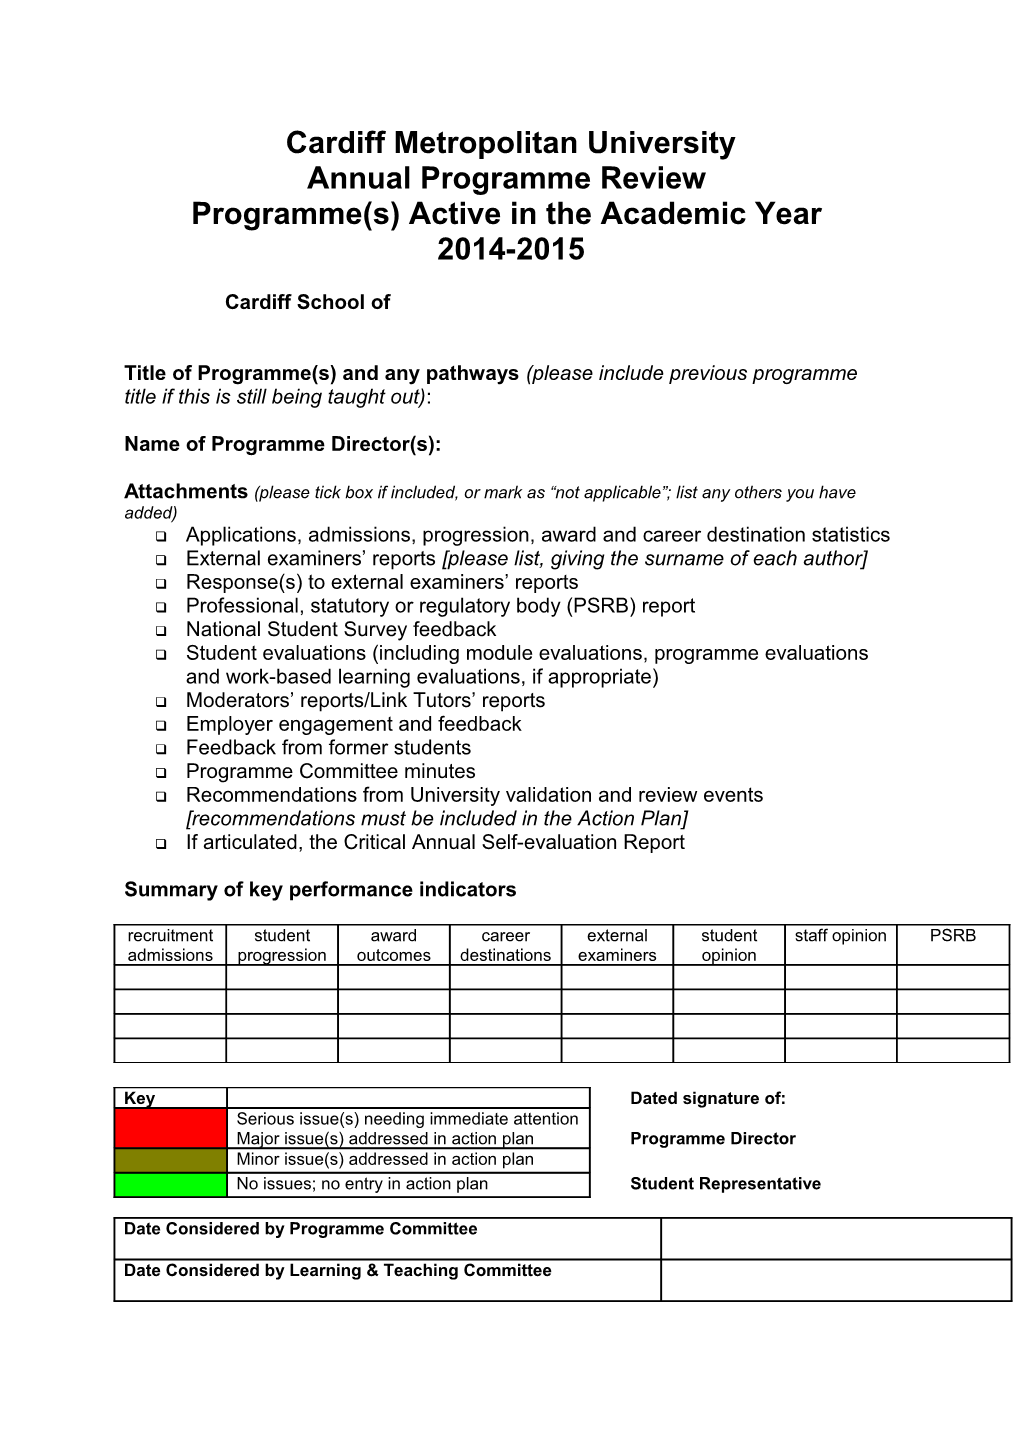 Annual Programme Review Template and ACTION PLAN